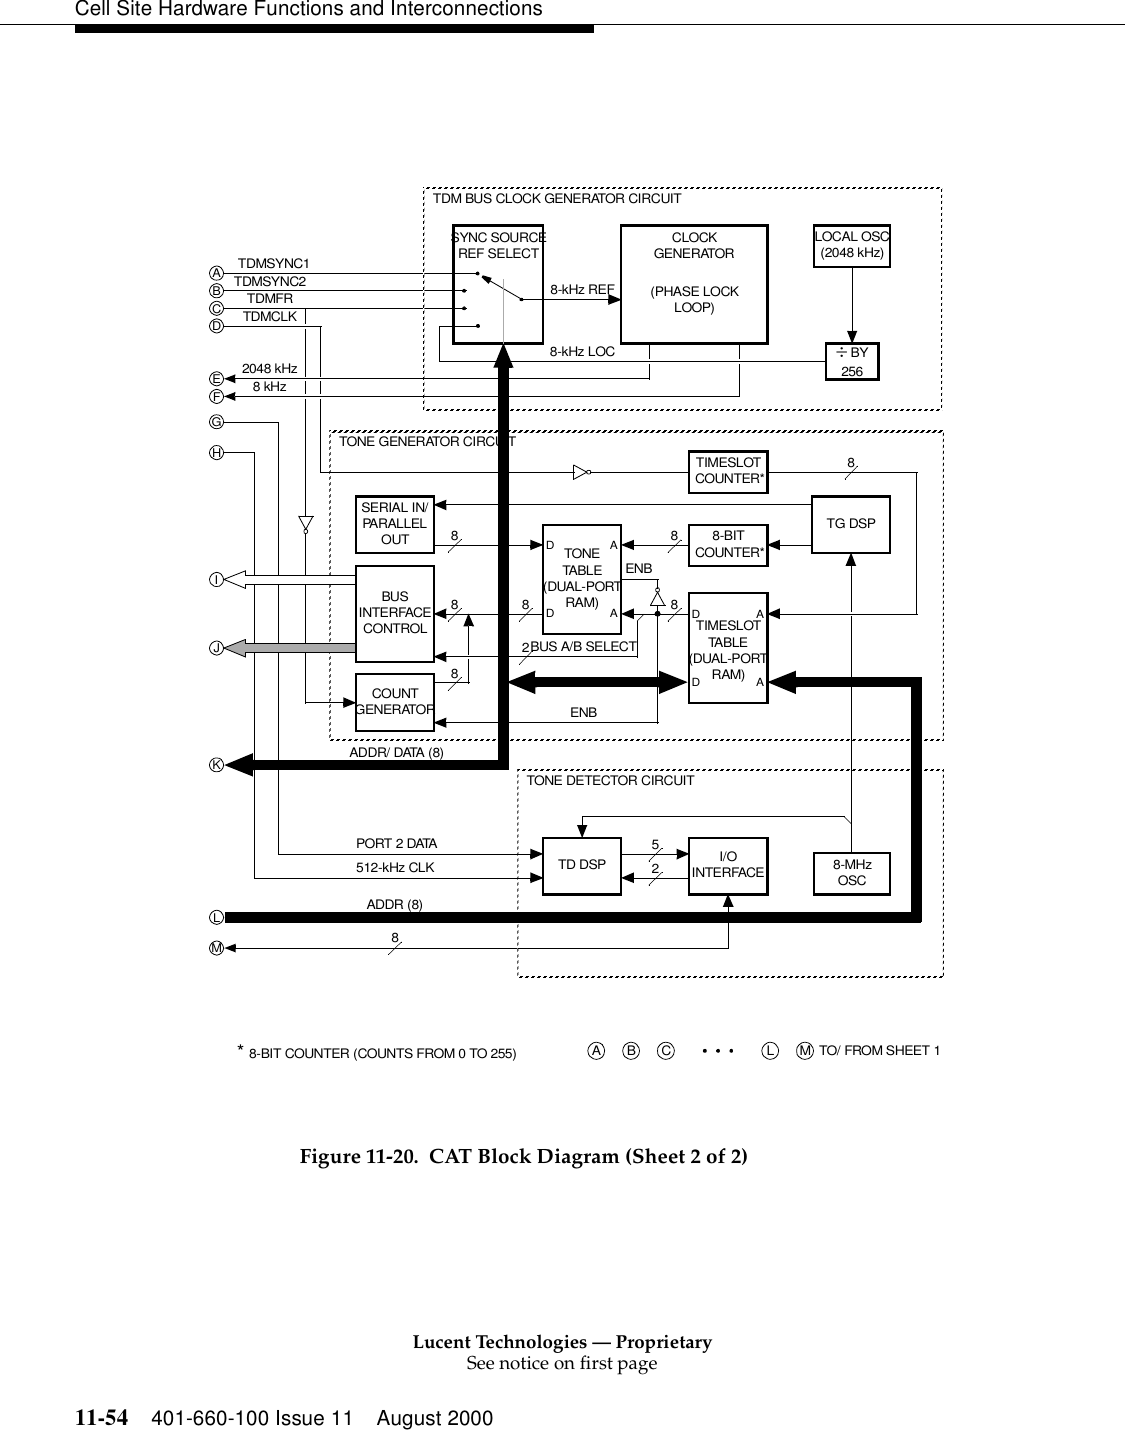 Lucent Technologies — ProprietarySee notice on first page11-54 401-660-100 Issue 11 August 2000Cell Site Hardware Functions and InterconnectionsFigure 11-20. CAT Block Diagram (Sheet 2 of 2)L M TO/ FROM SHEET 1A B C8IJKLMSYNC SOURCEREF SELECTABCDEFTDMSYNC2TDMSYNC1TDMFRTDMCLK2048 kHz8 kHzLOCAL OSC(2048 kHz)* 8-BIT COUNTER (COUNTS FROM 0 TO 255)BUSINTERFACECONTROL TIMESLOTTA B LE(DUAL-PORTRAM)ADAD8-BITCOUNTER*TG DSPTONETABLE(DUAL-PORTRAM)ADADSERIAL IN/PA R AL L ELOUTGTIMESLOTCOUNTER*H PORT 2 DATATD DSP I/OINTERFACEBUS A/B SELECTCLOCKGENERATOR(PHASE LOCKLOOP)8-kHz REF8-MHzOSC512-kHz CLKADDR (8) ADDR/ DATA (8)TDM BUS CLOCK GENERATOR CIRCUITTONE GENERATOR CIRCUITCOUNTGENERATOR888 8888÷ BY2568-kHz LOCTONE DETECTOR CIRCUIT52ENBENB2